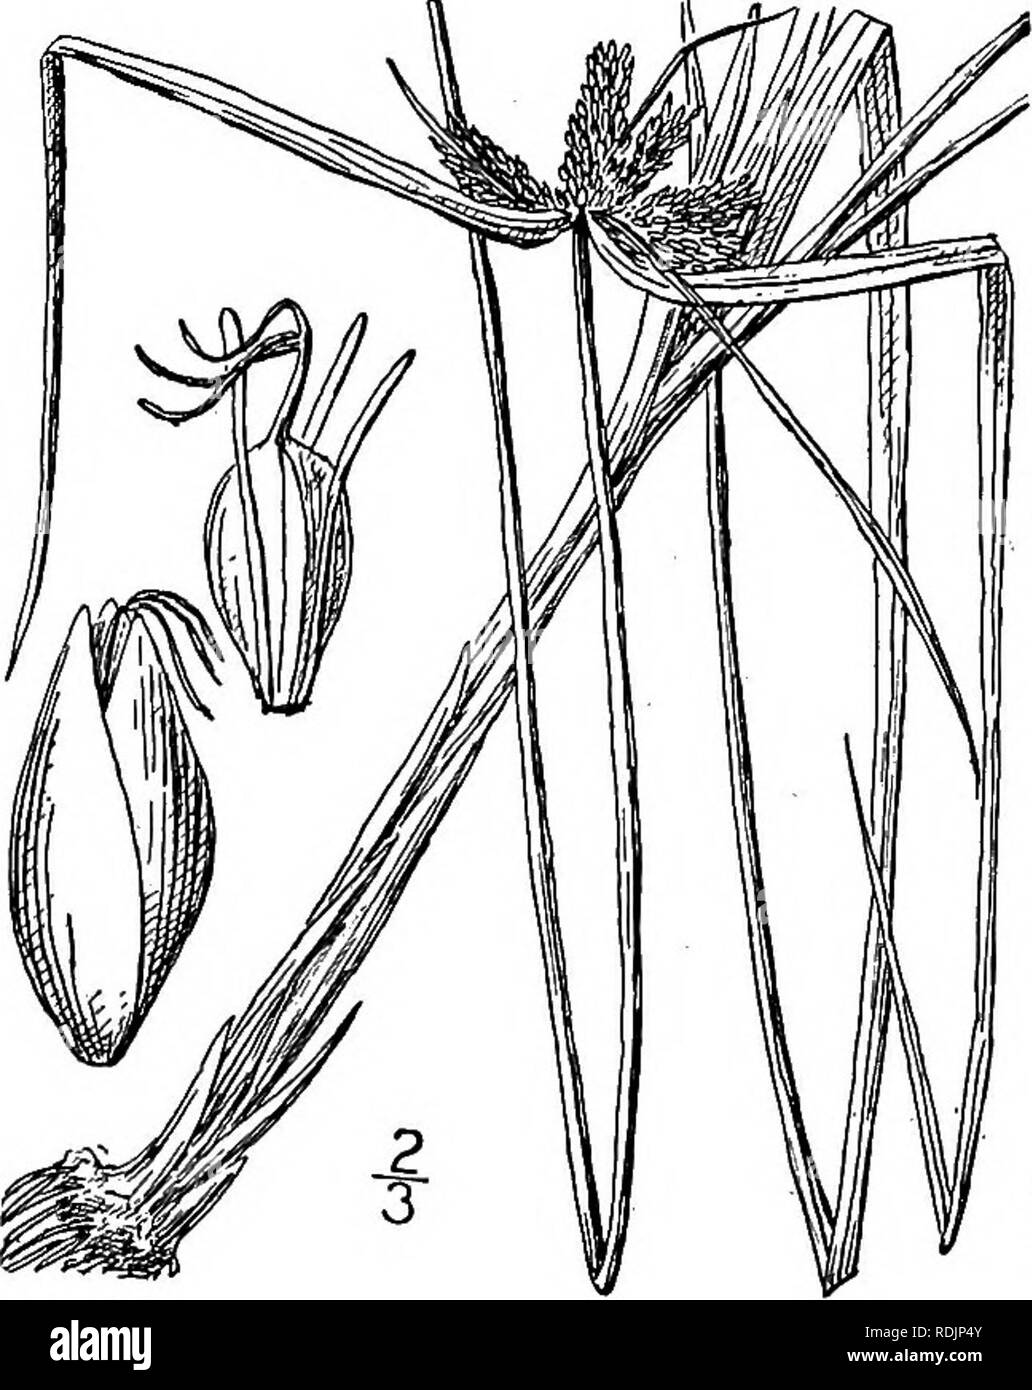 . An illustrated flora of the northern United States, Canada and the British possessions, from Newfoundland to the parallel of the southern boundary of Virginia, and from the Atlantic Ocean westward to the 102d meridian. Botany; Botany. 34. Cyperus filiculmis Vahl. Slender Cyperus. Fig. 754. Cyperus filiculmis Vahl, Enum. 2 : 328. 1806. C. filiculmis macilentus Fernald, Rhodora 8: 128. 1906. C. macilentus Bicknell, Bull. Torr. Club 35: 478. 1908. Perennial by hard oblong corms, culm smooth, slen- der or almost filiform, ascending or reclined, 6'-i8' long, usually longer than the rough-margined Stock Photo